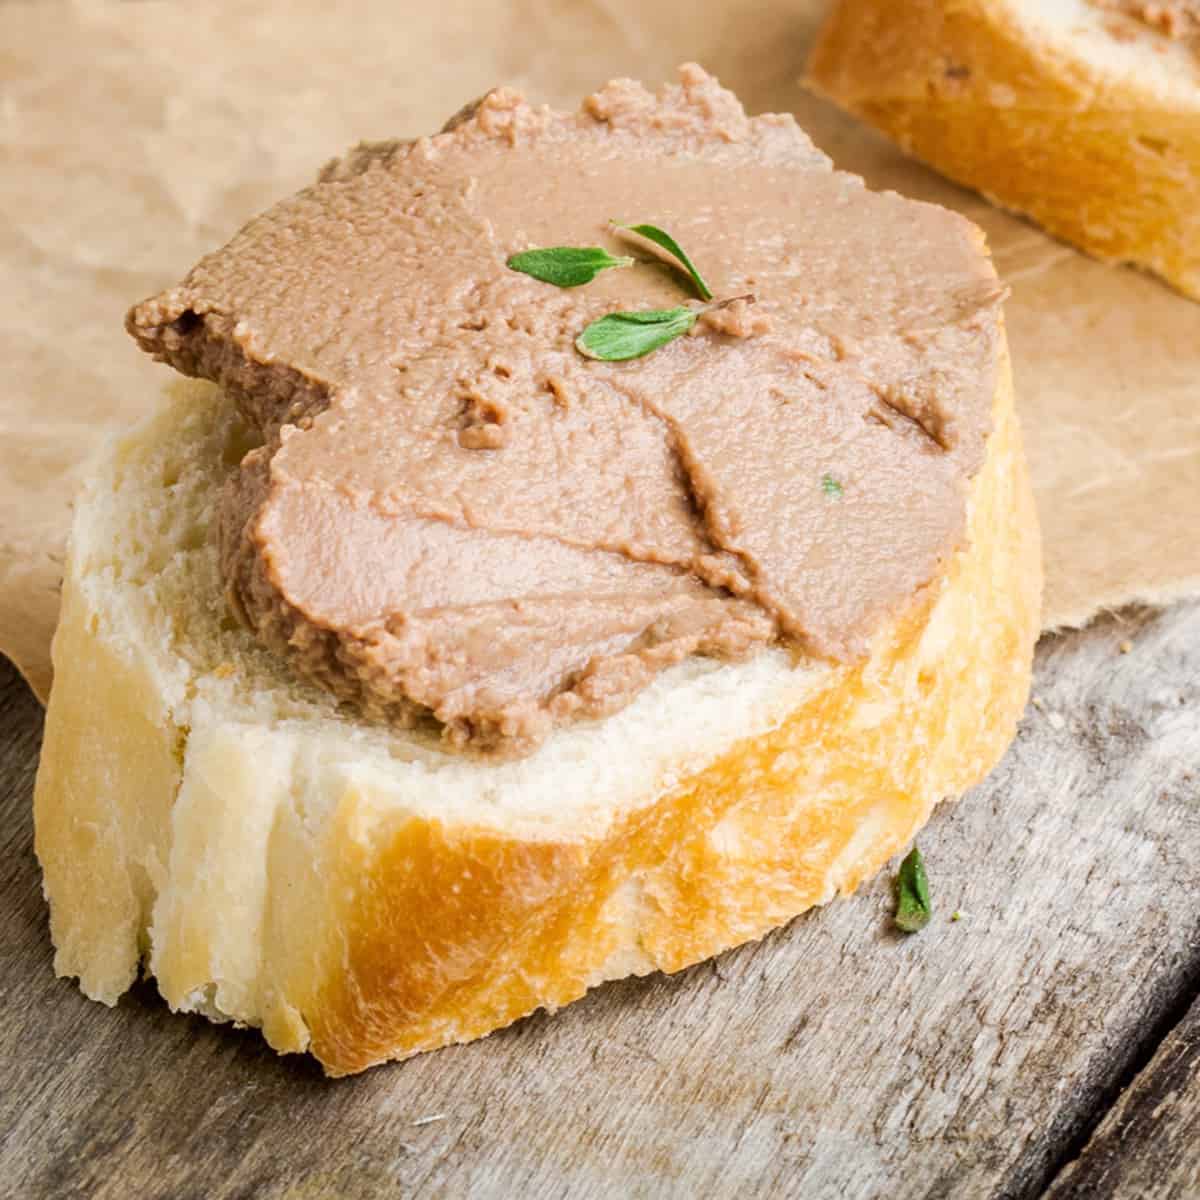 20-pate-nutrition-facts